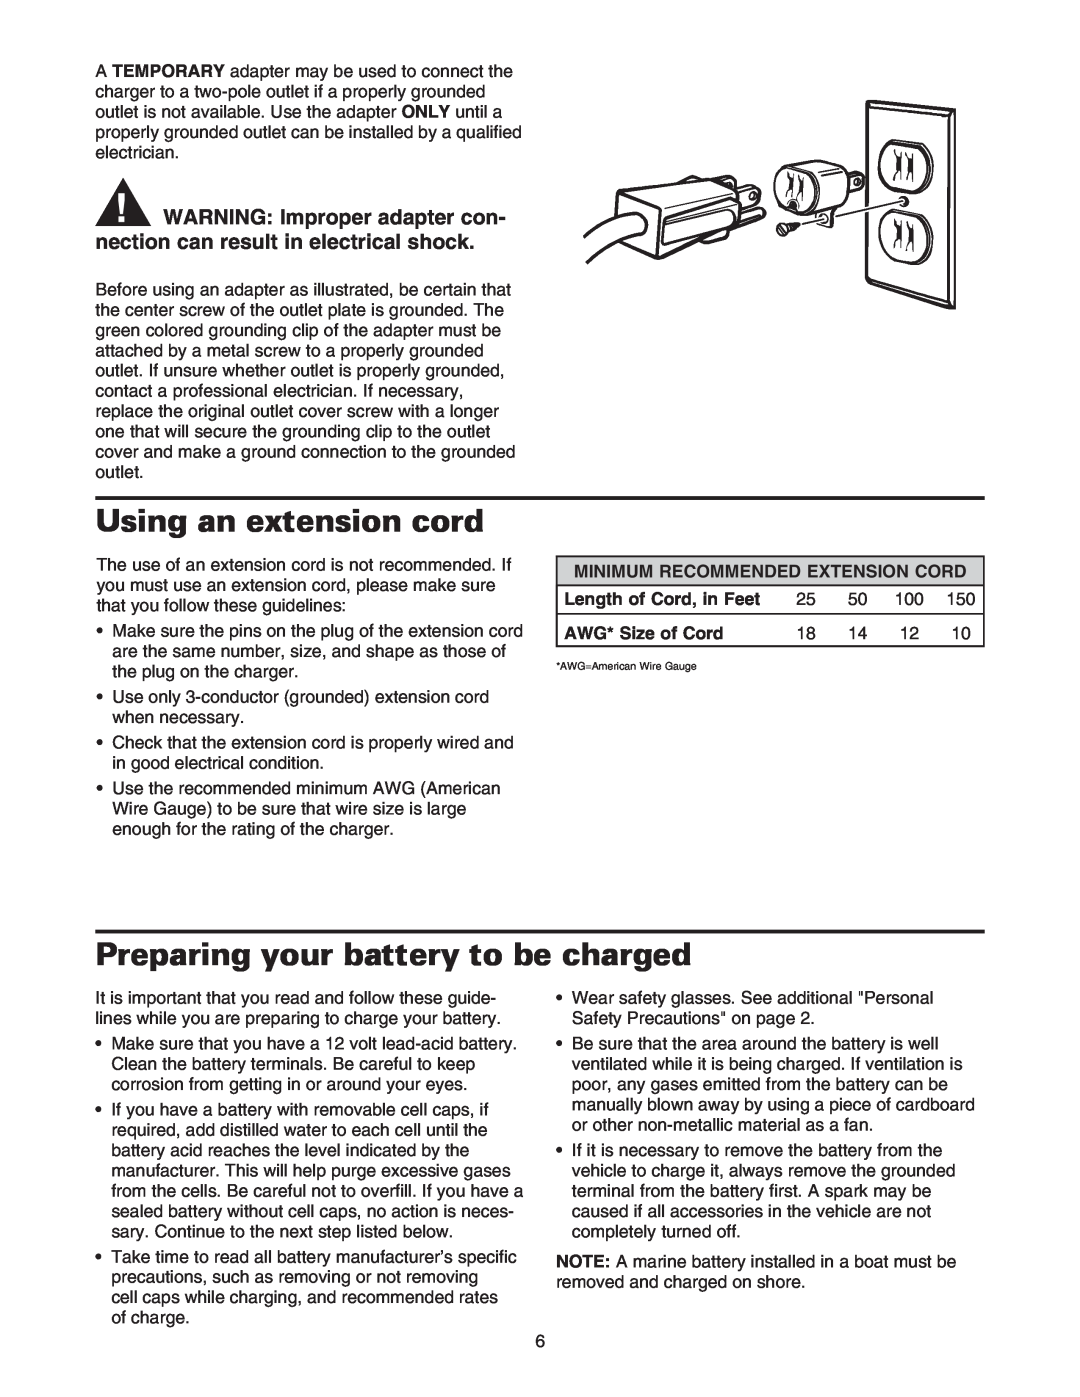 Sears 200.71231 owner manual Using an extension cord, Preparing your battery to be charged 